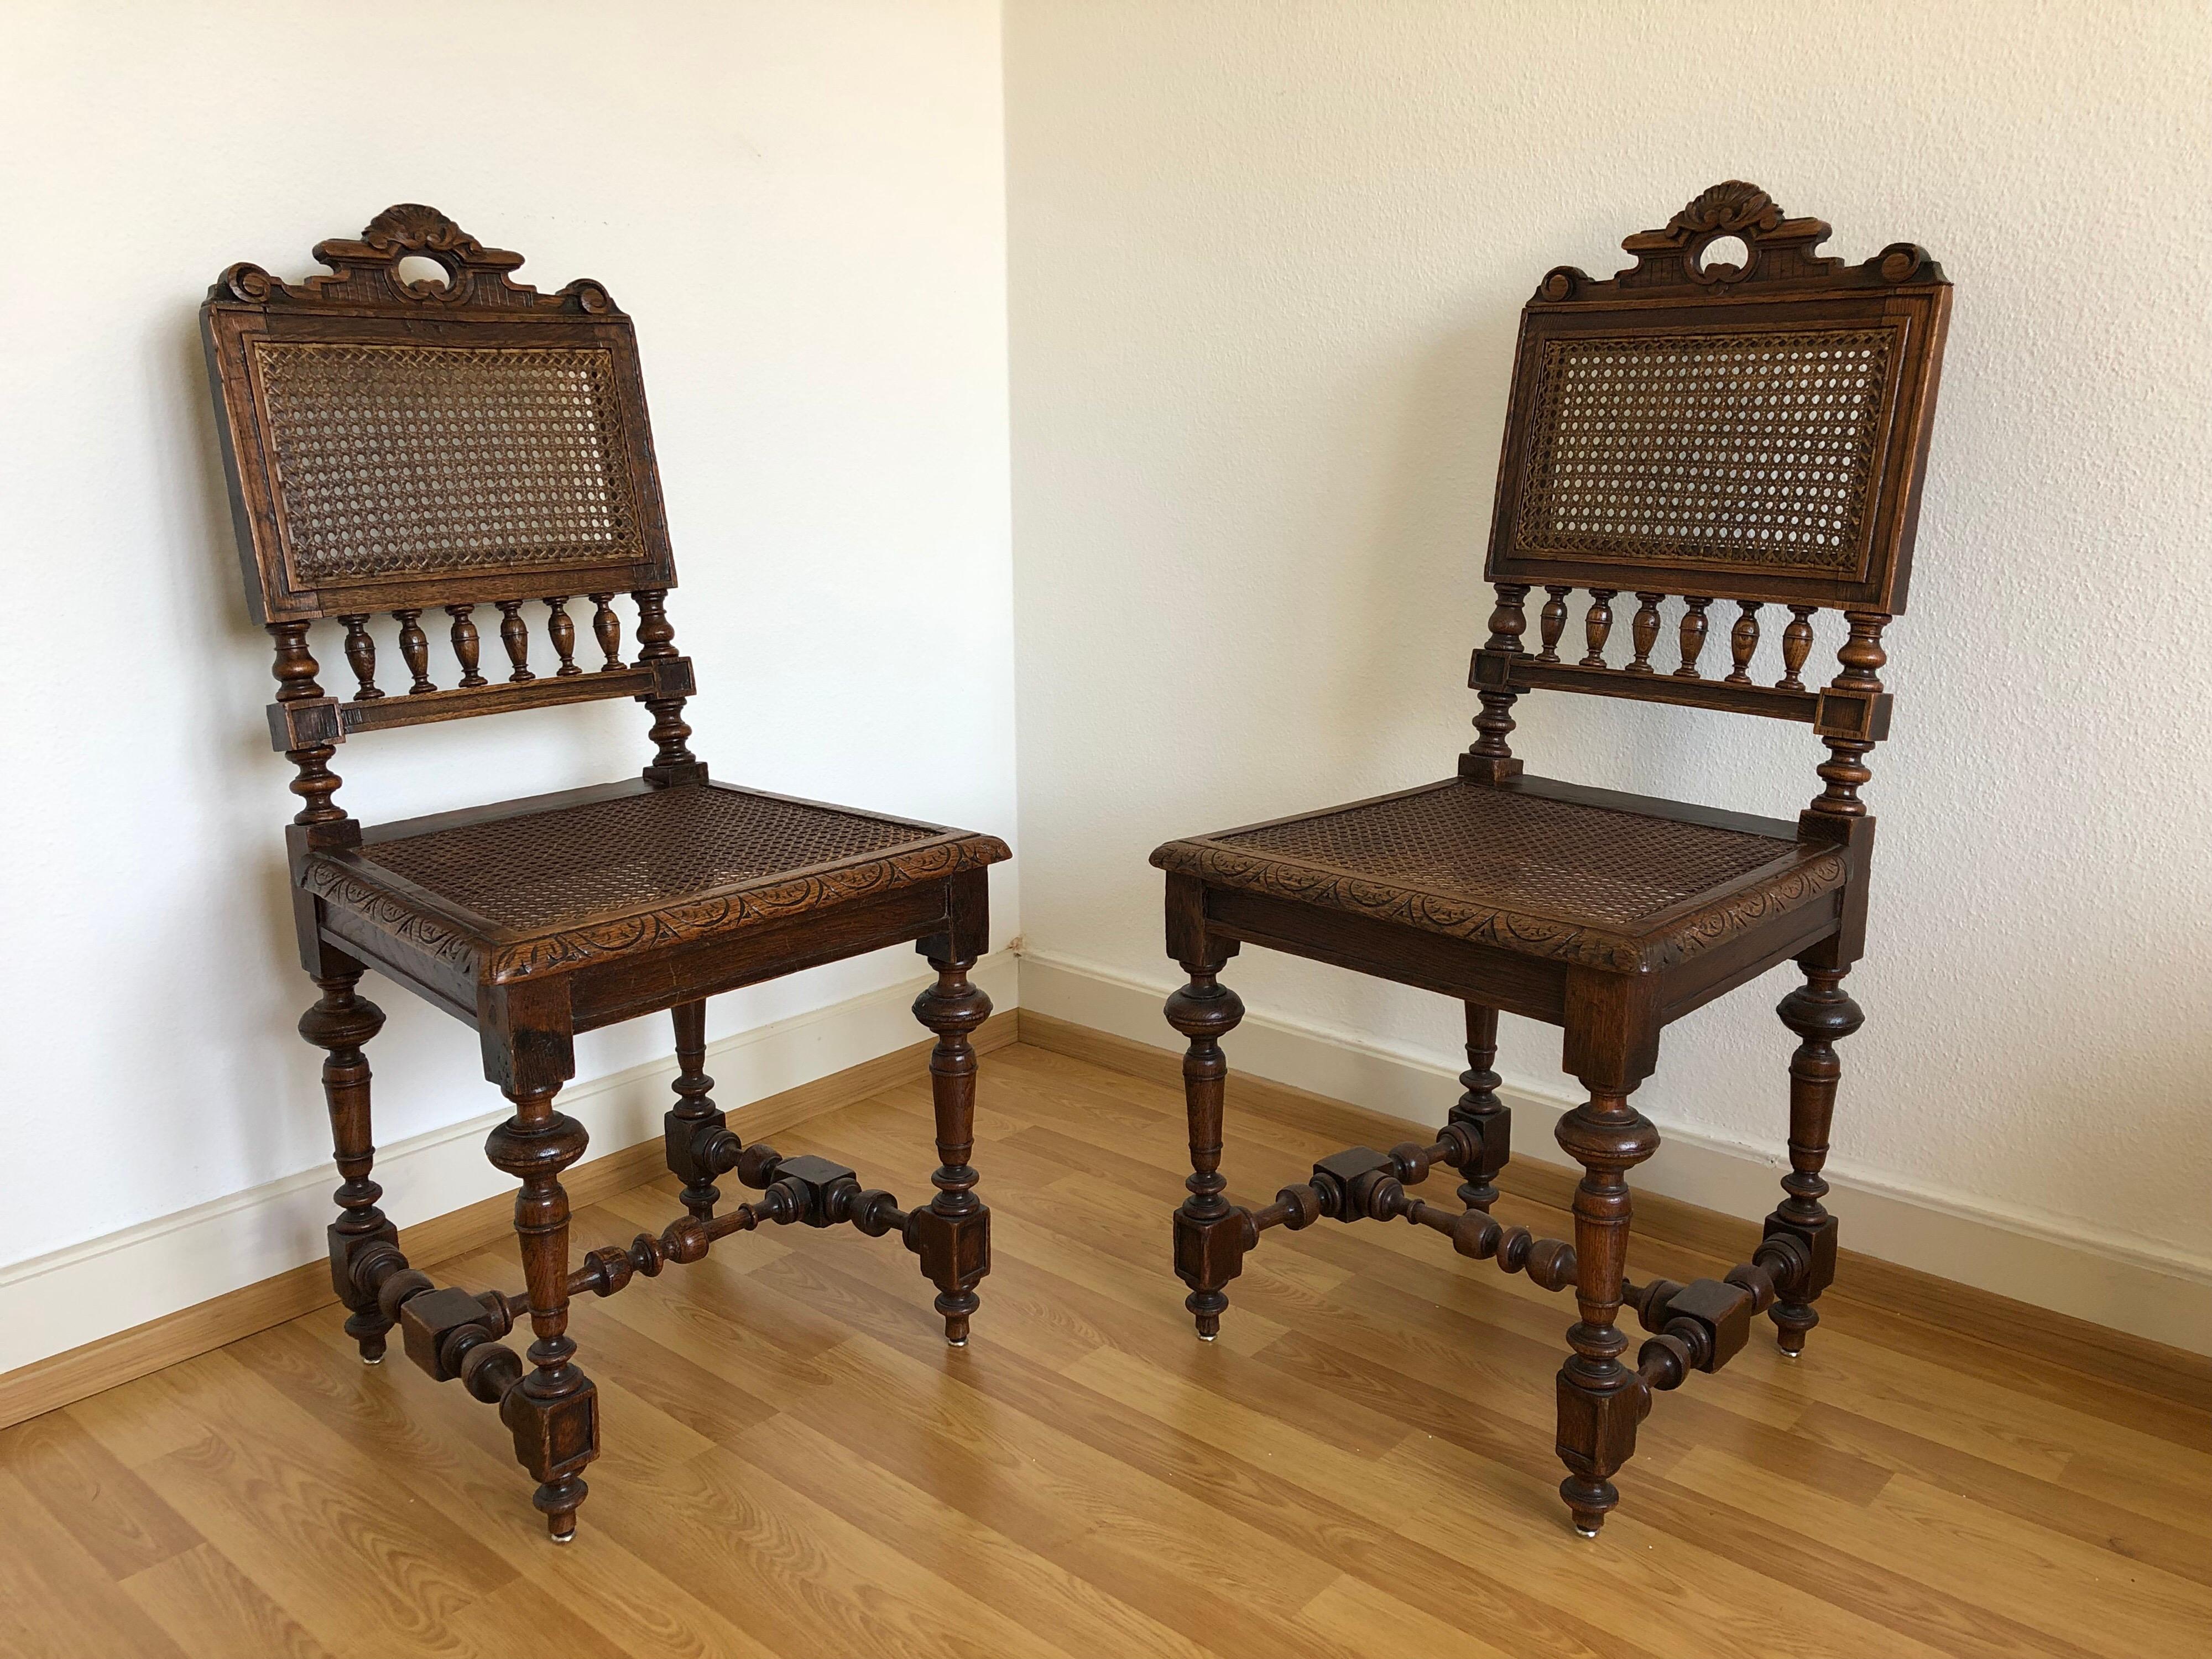 Hand-Carved SALE Pair of Renaissance Revival Carved Cane Chairs Complimentary Shipping 